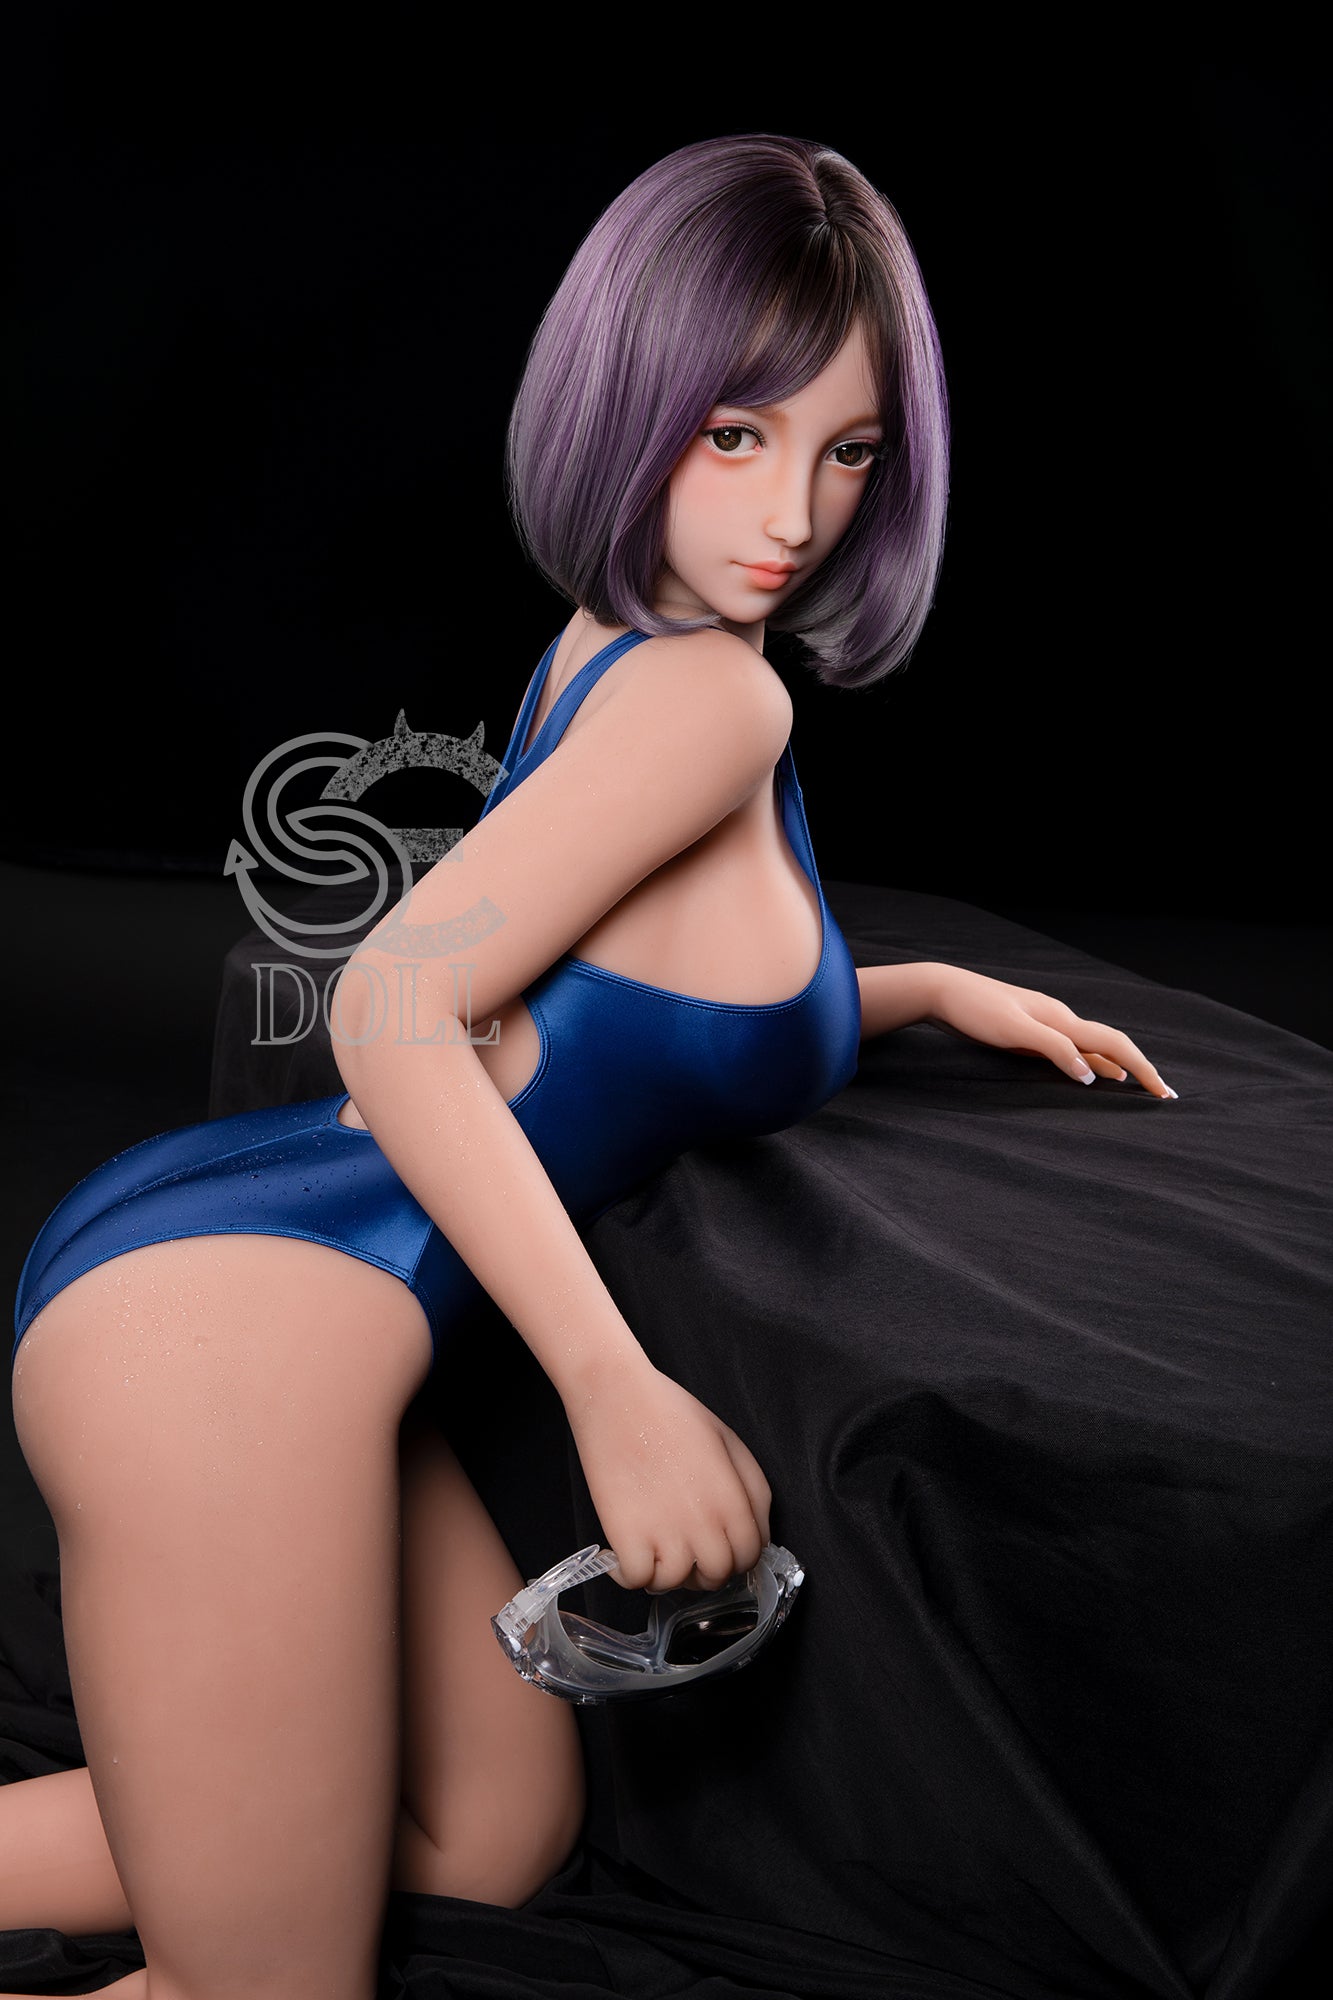 SEDOLL 161 cm F TPE - Miki | Buy Sex Dolls at DOLLS ACTUALLY